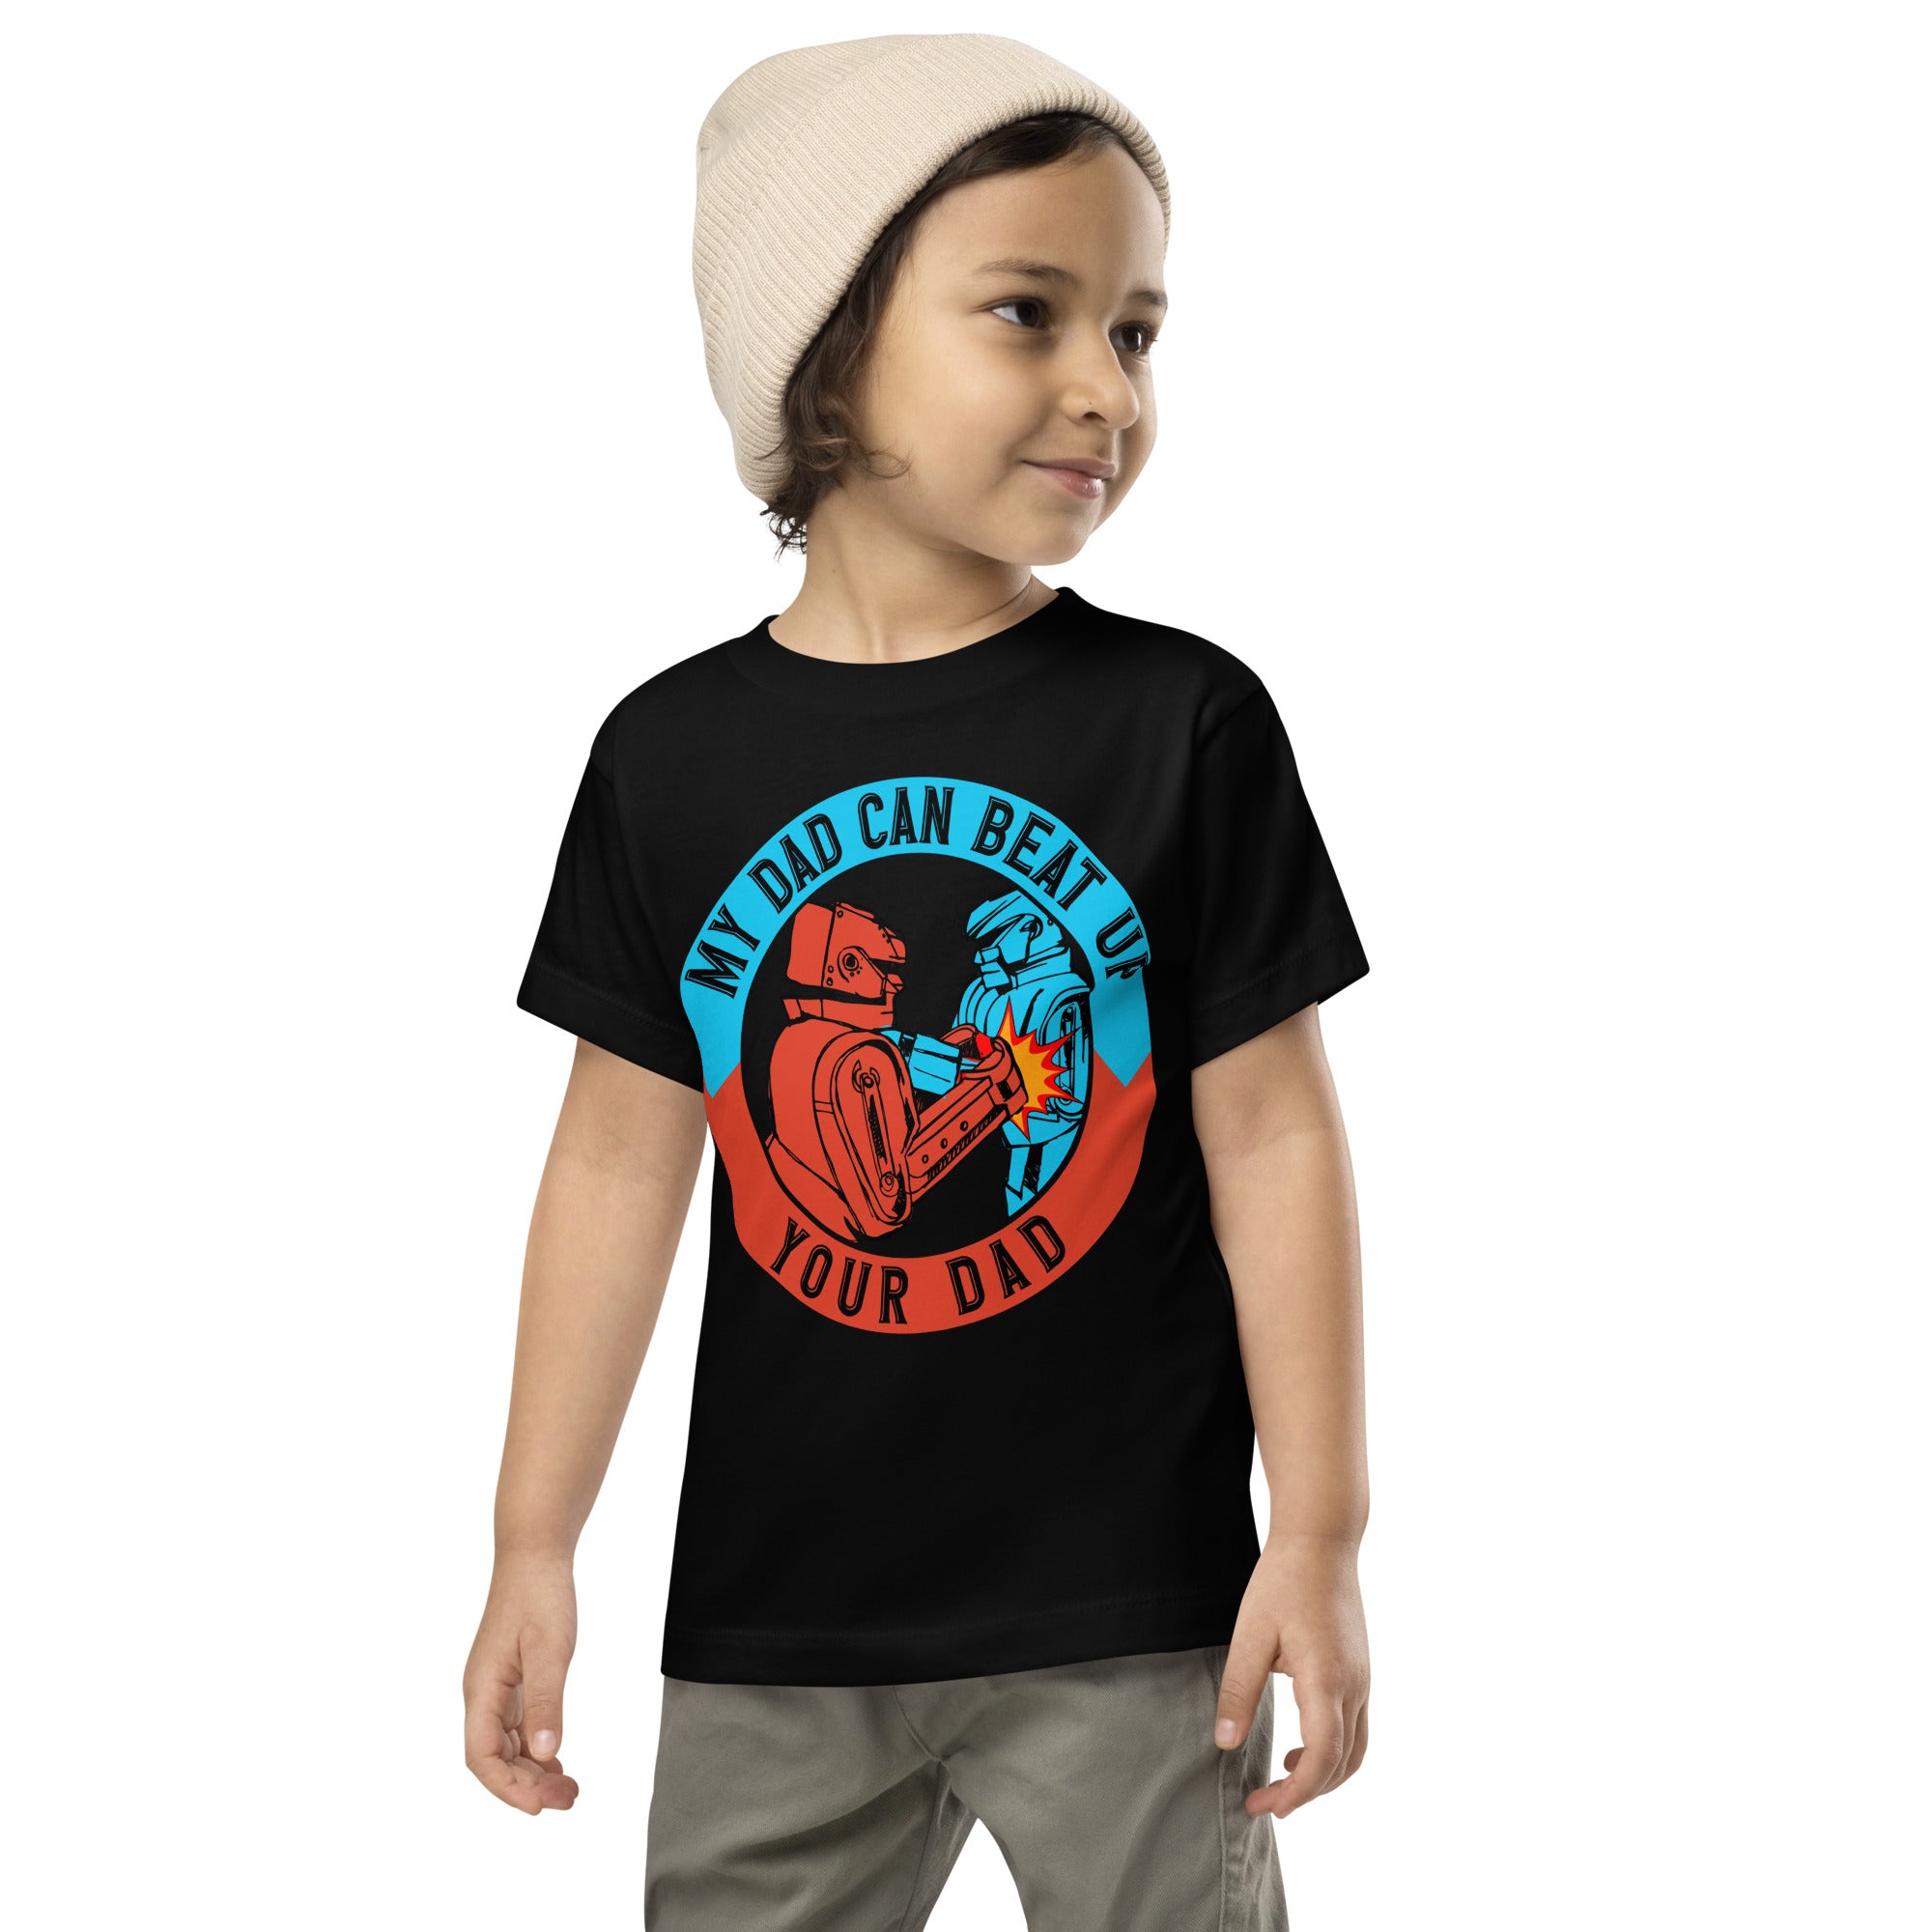 My Dad Can Beat Up Your Dad - Toddler Short Sleeve Tee